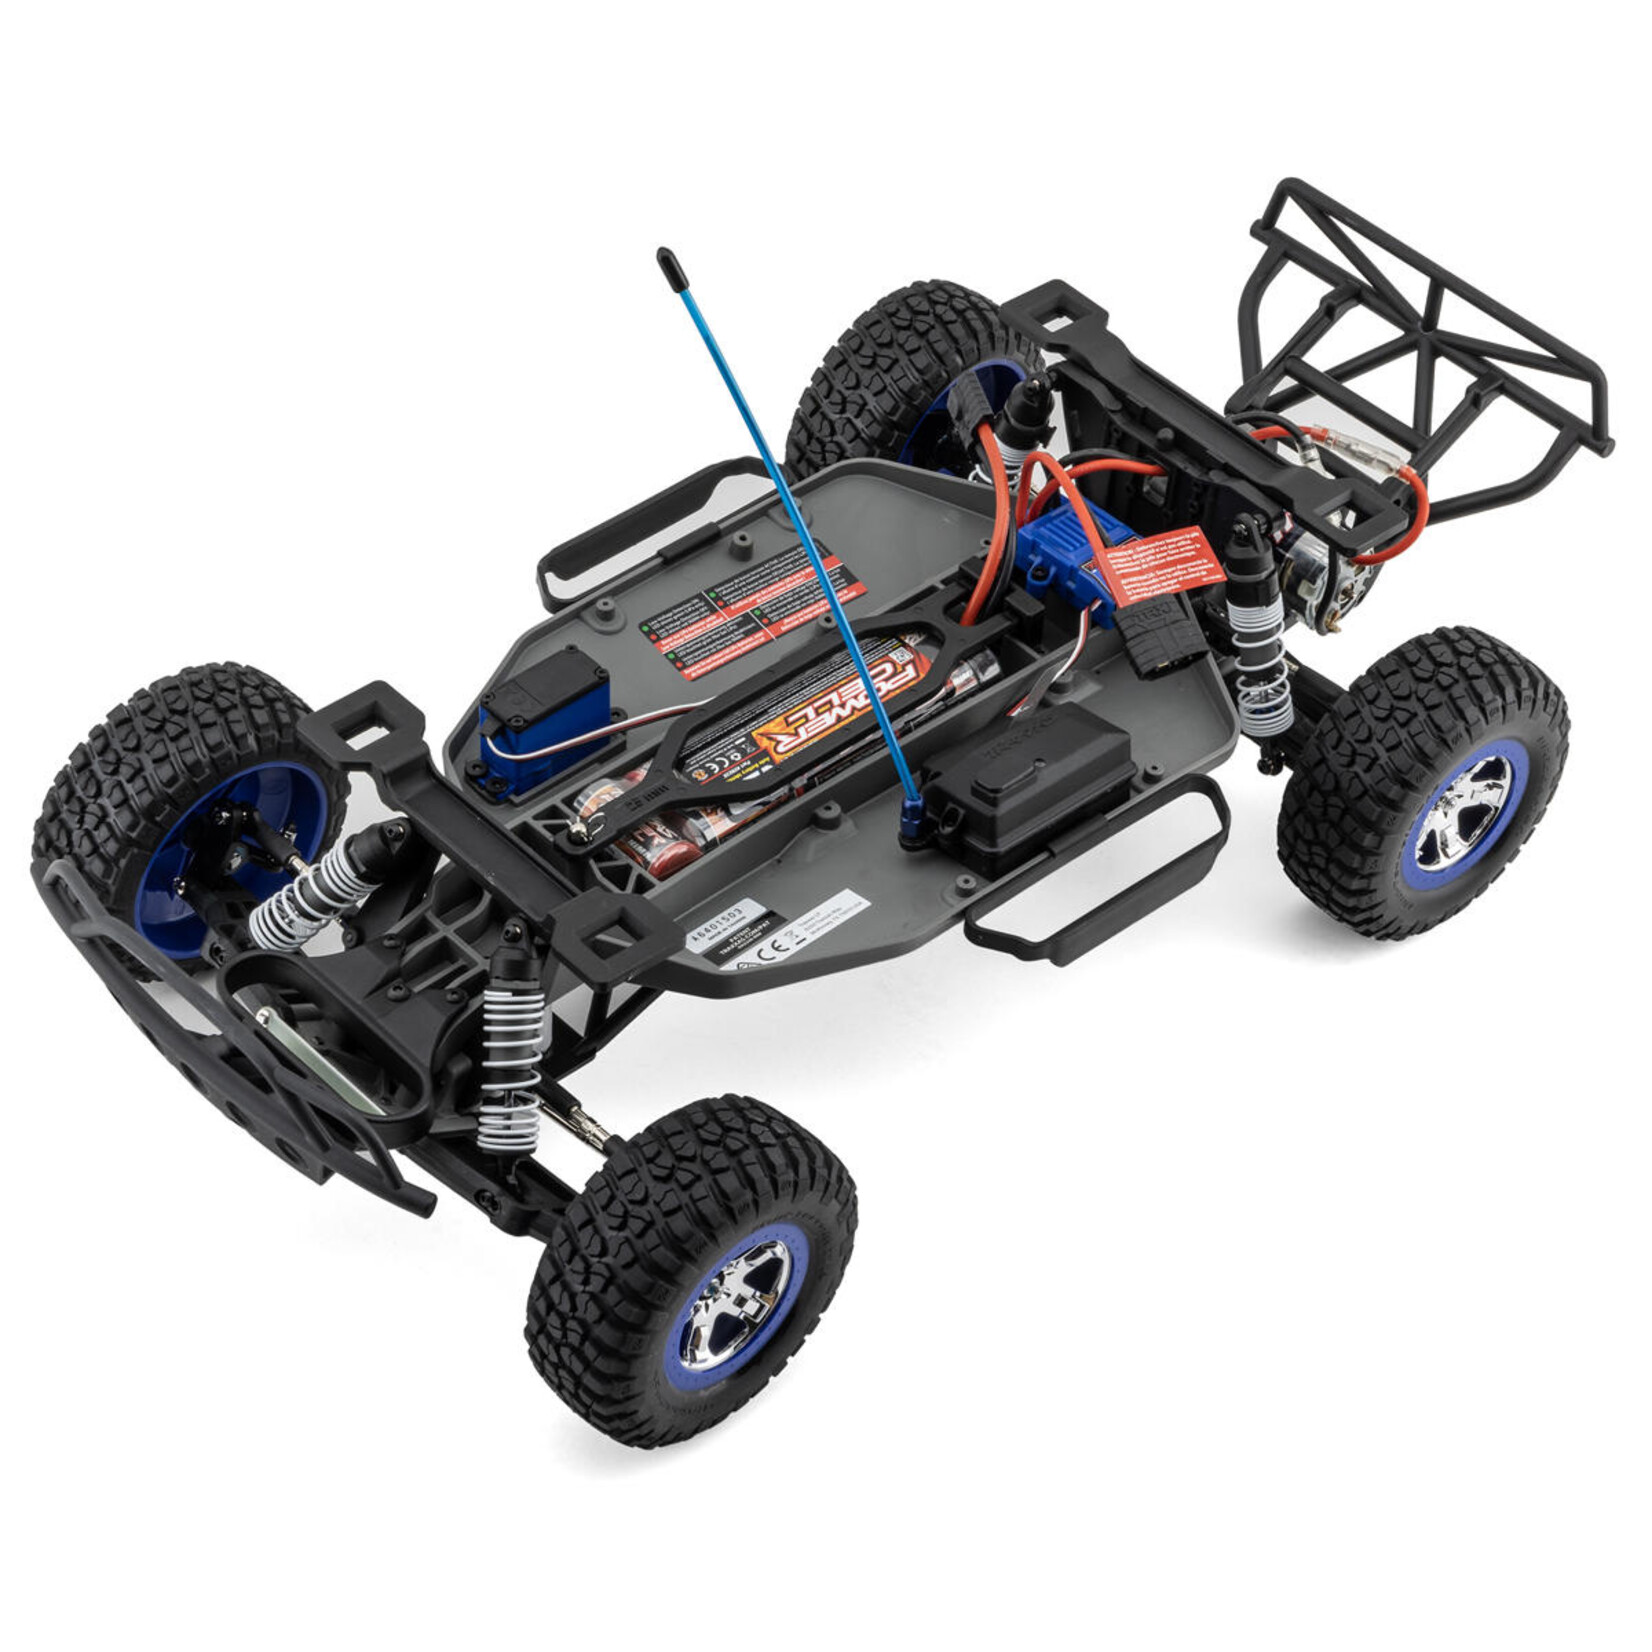 Traxxas Traxxas Slash 1/10 RTR 2WD Short Course Truck (Red) w/XL-5 ESC, TQ 2.4GHz Radio, Battery & USB-C Charger #58034-8-RED